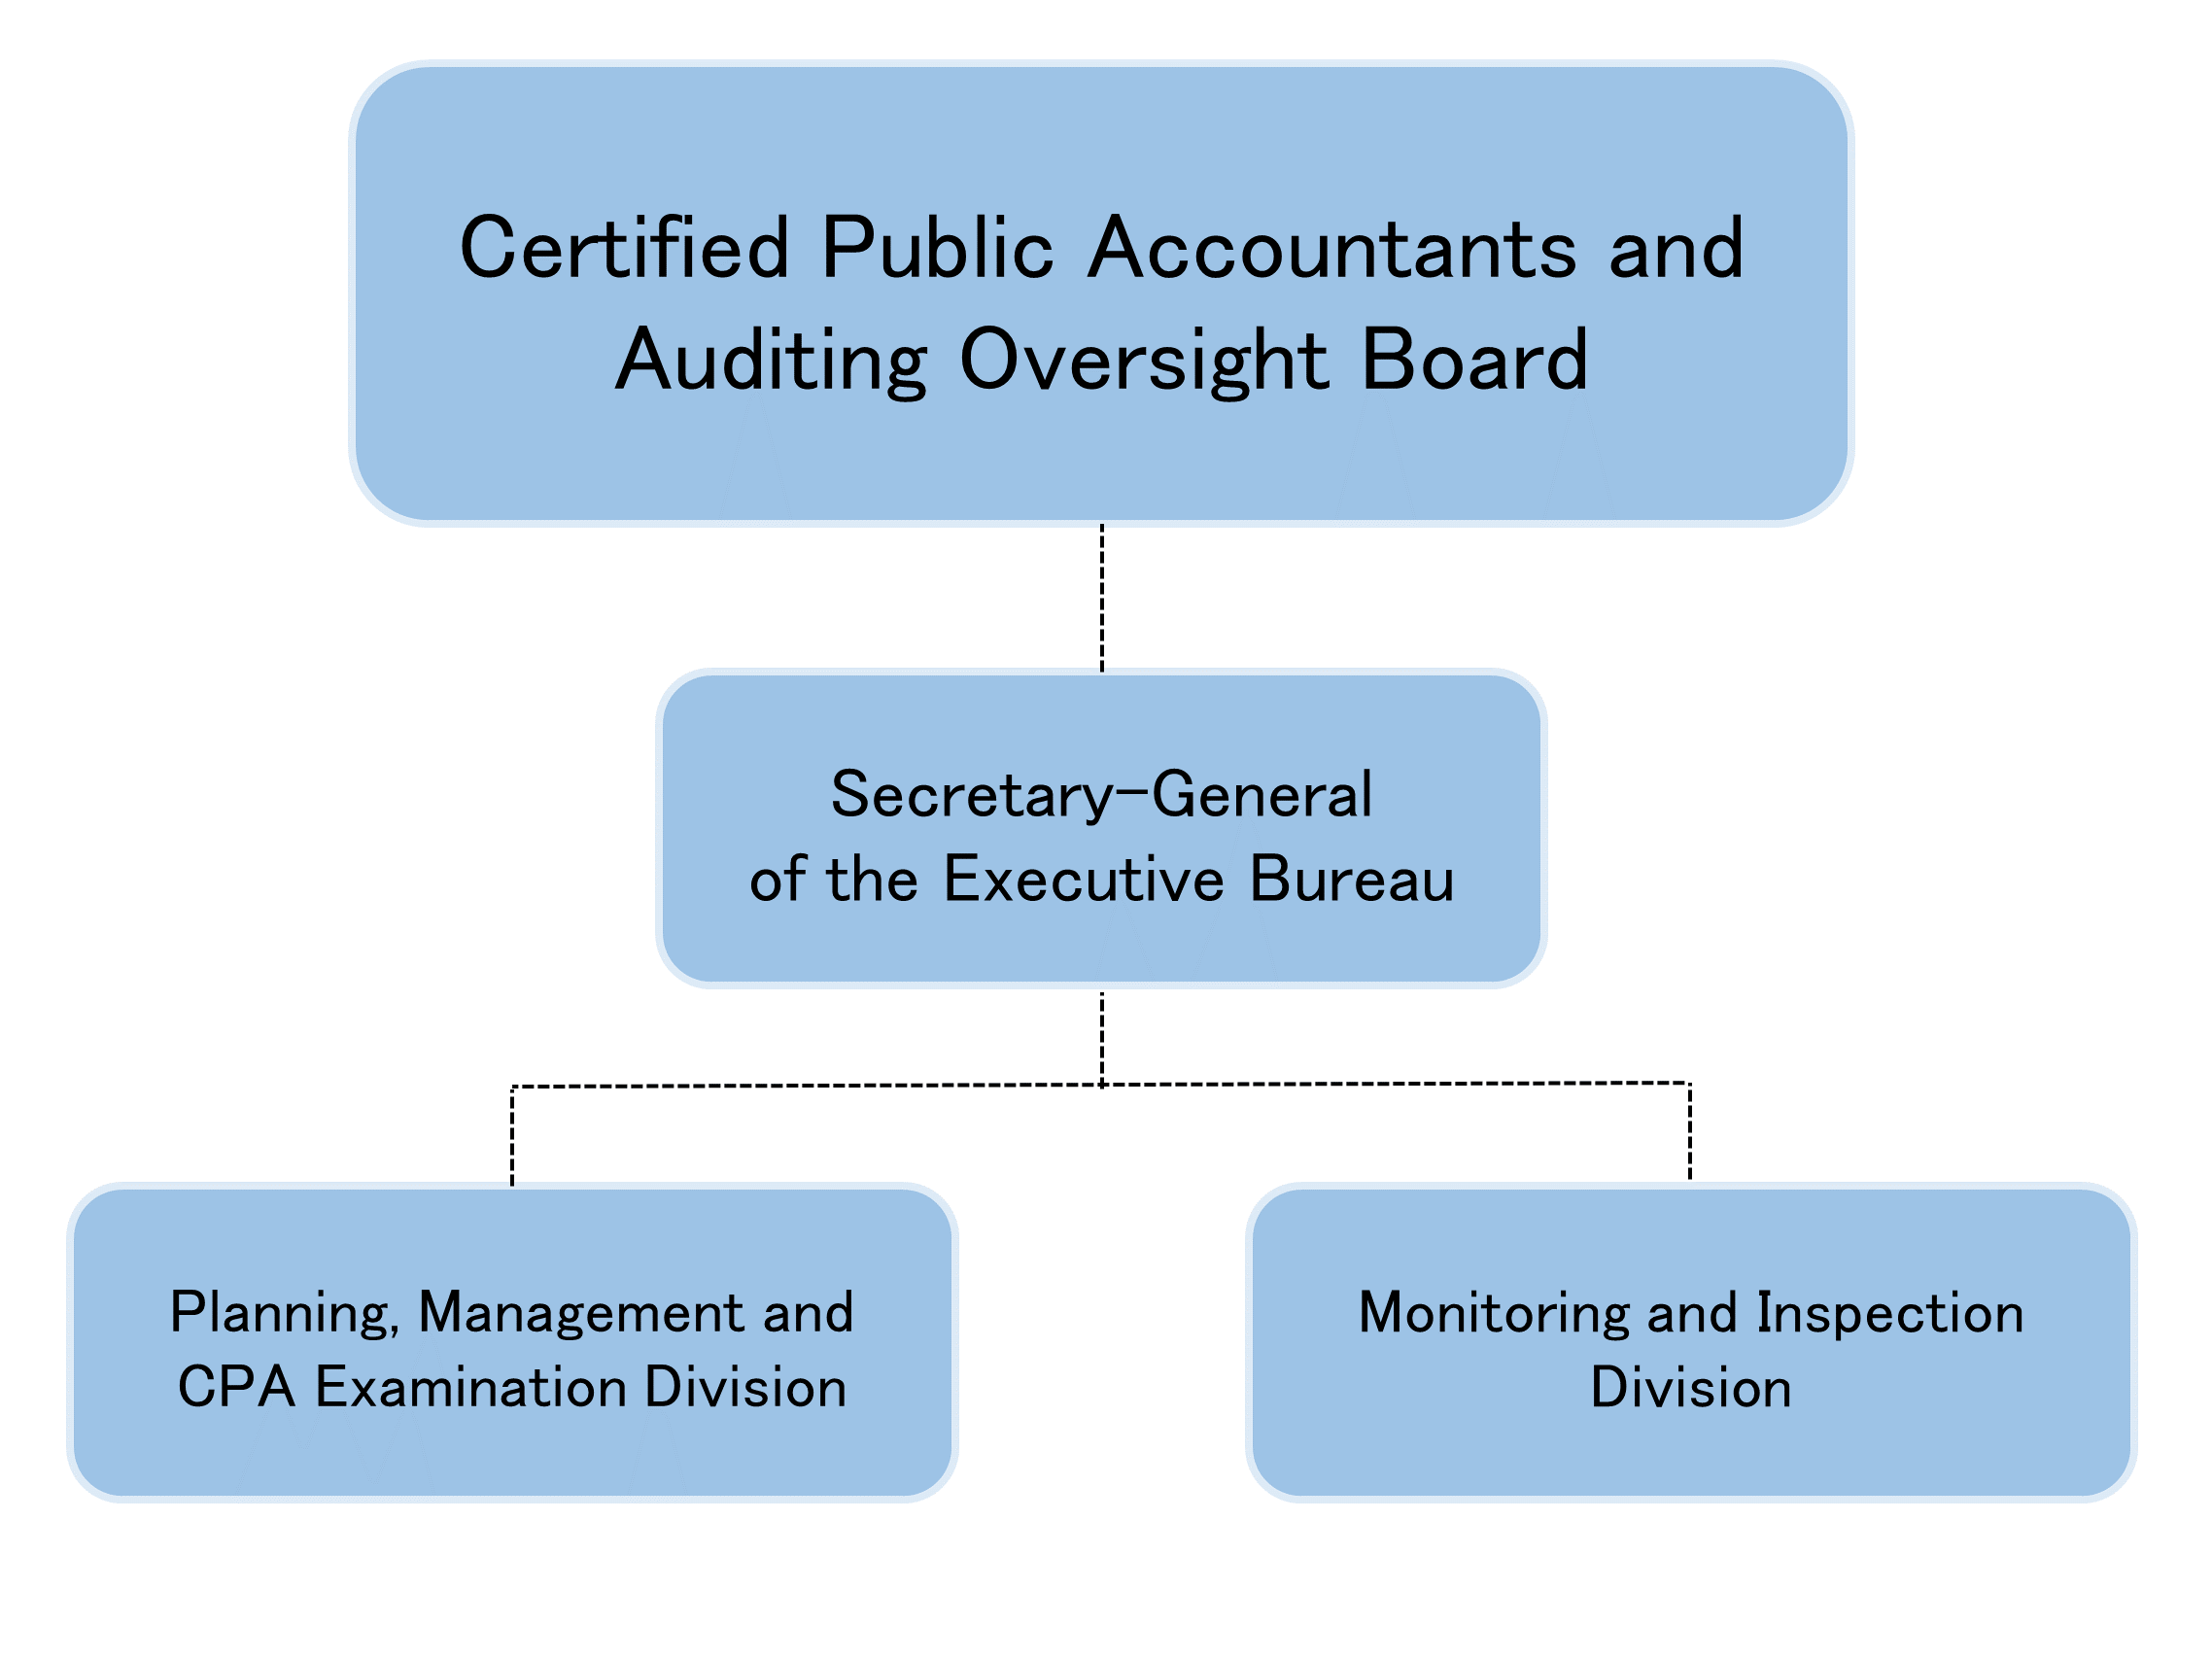 The CPAAOB is an independent regulatory body (council) established within the Financial Services Agency (FSA), consisting of one chairperson and one full-time and eight part-time commissioners. The CPAAOB has an Executive Bureau to handle its administrative duties. The Executive Bureau consists of two divisions. The "Planning, Management and CPA Examination Division" is responsible forgeneral affairs, deliberation of disciplinary actions against CPAs and audit firms and implementation of CPA examinations. The "Monitoring and Inspection Division" is in charge of oversight of the quality control review. 